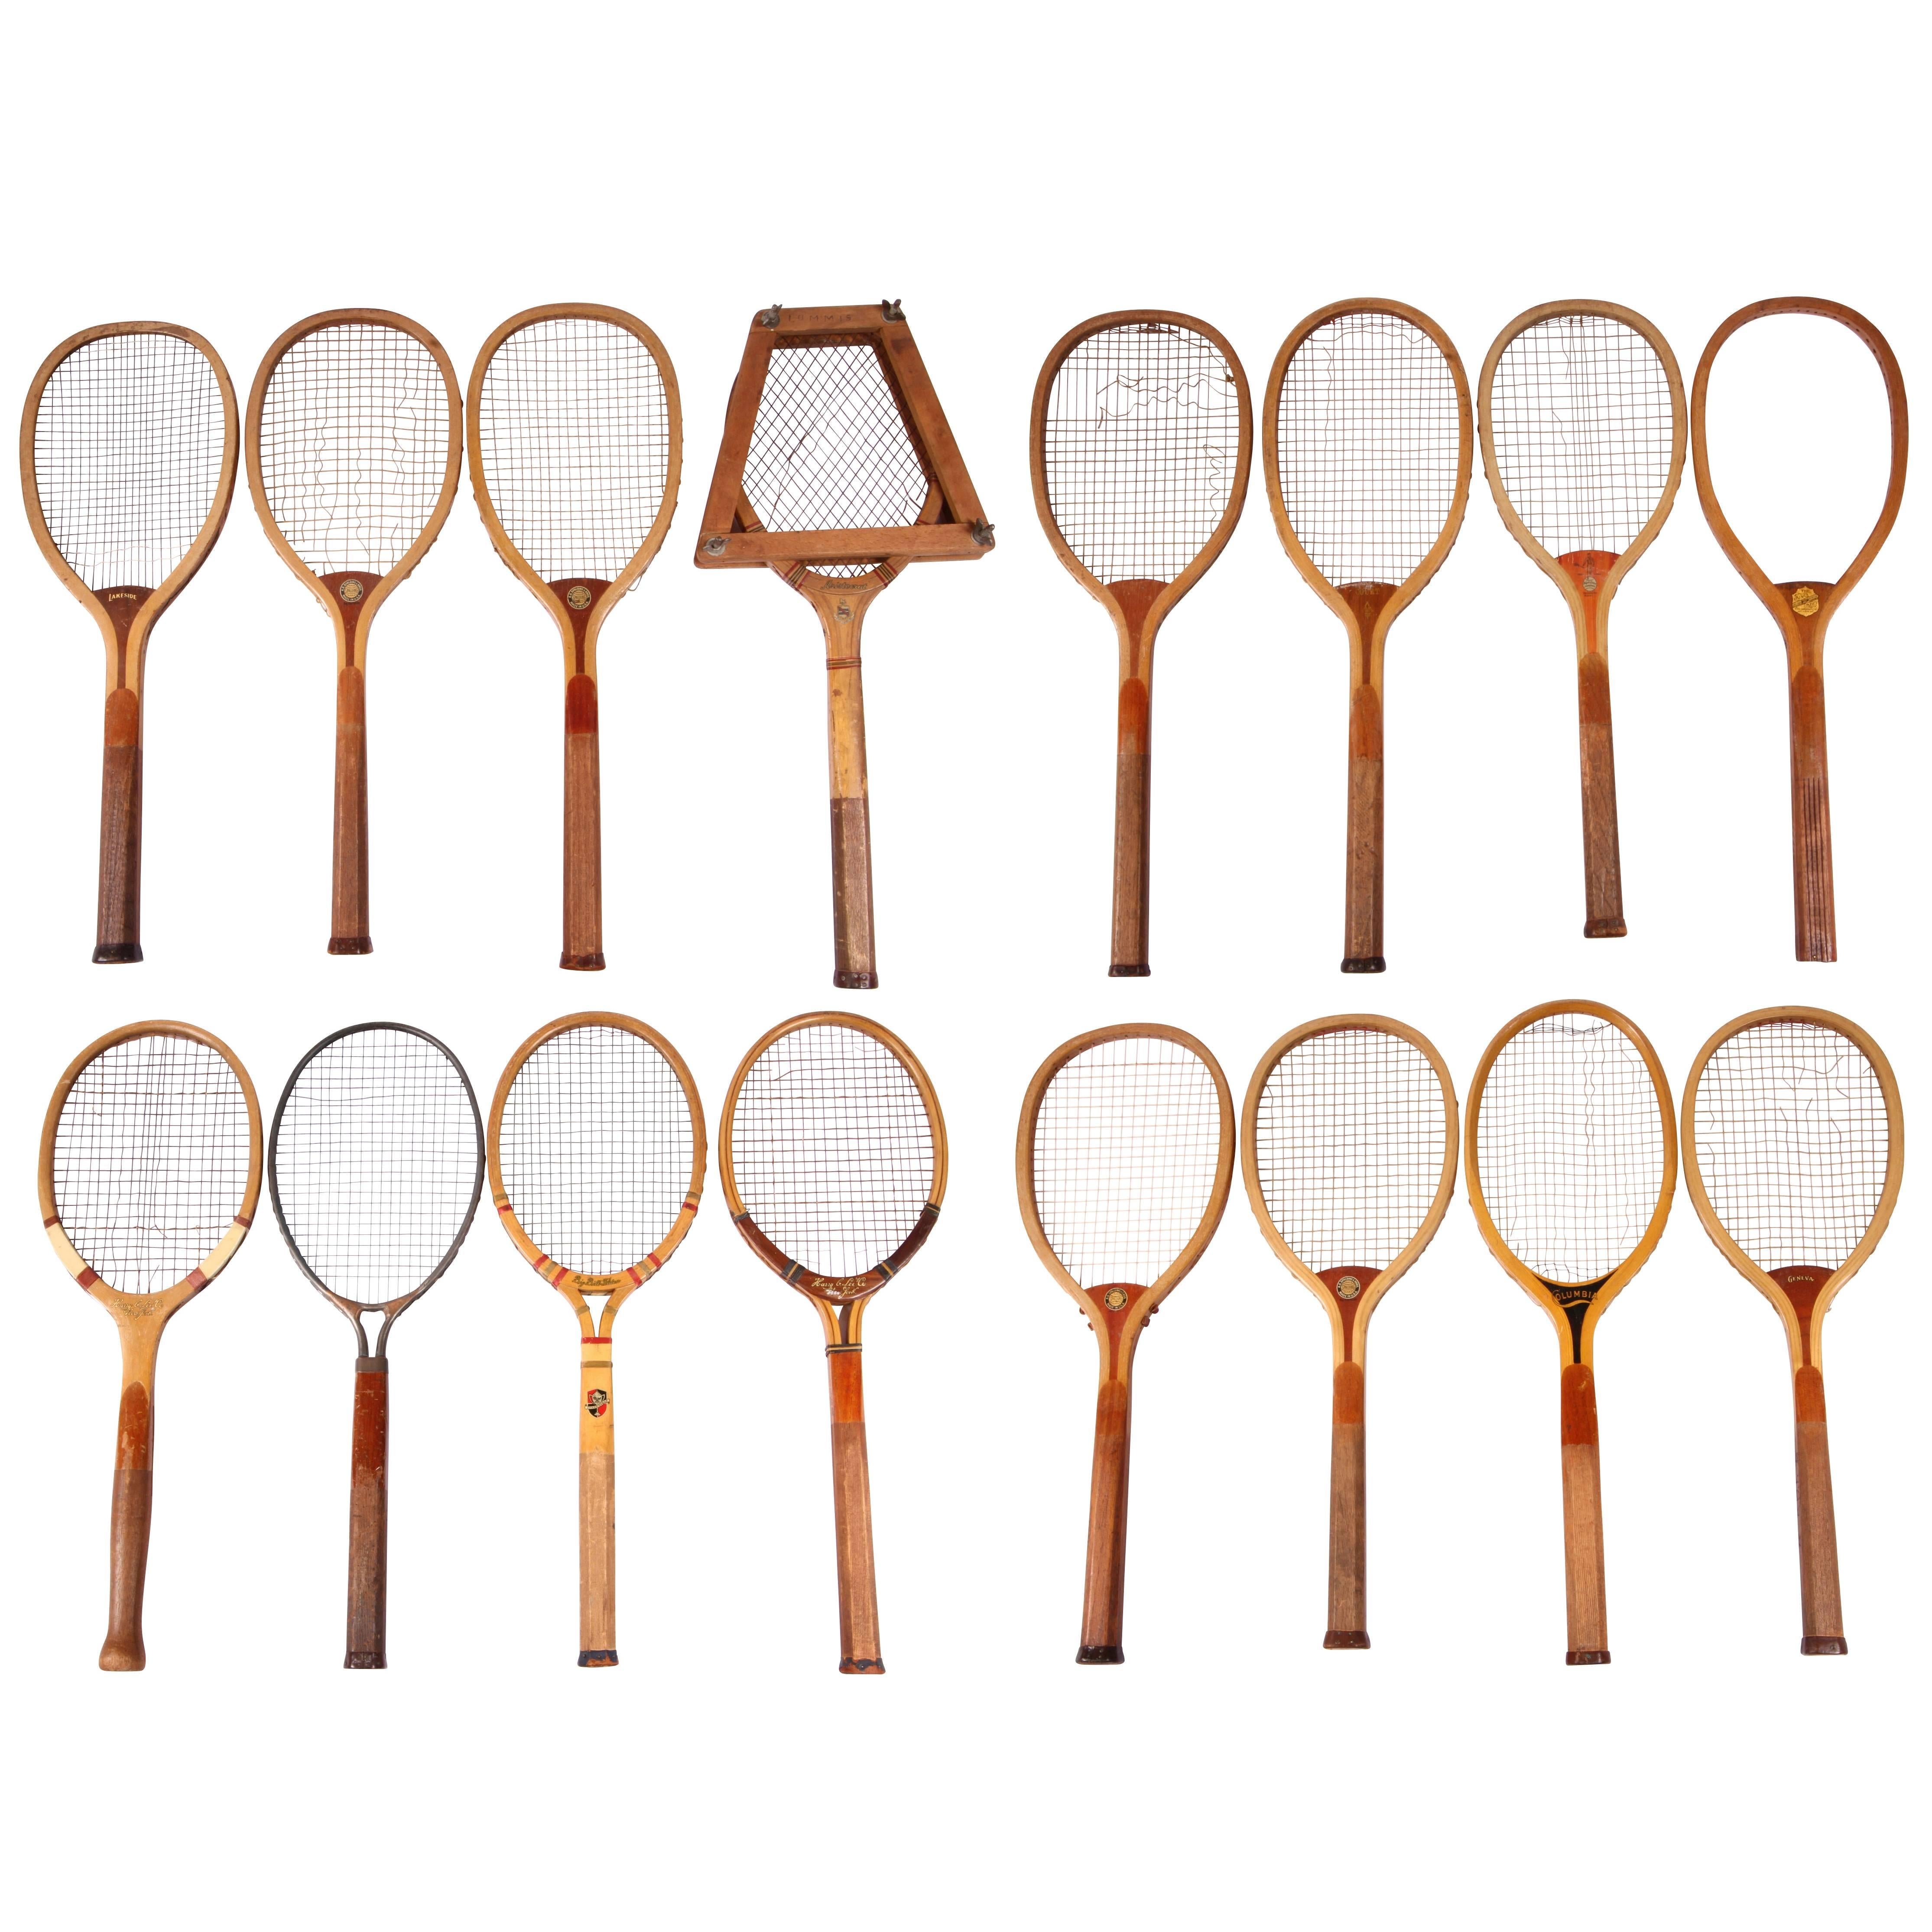 Collection of 16 Vintage Tennis Rackets